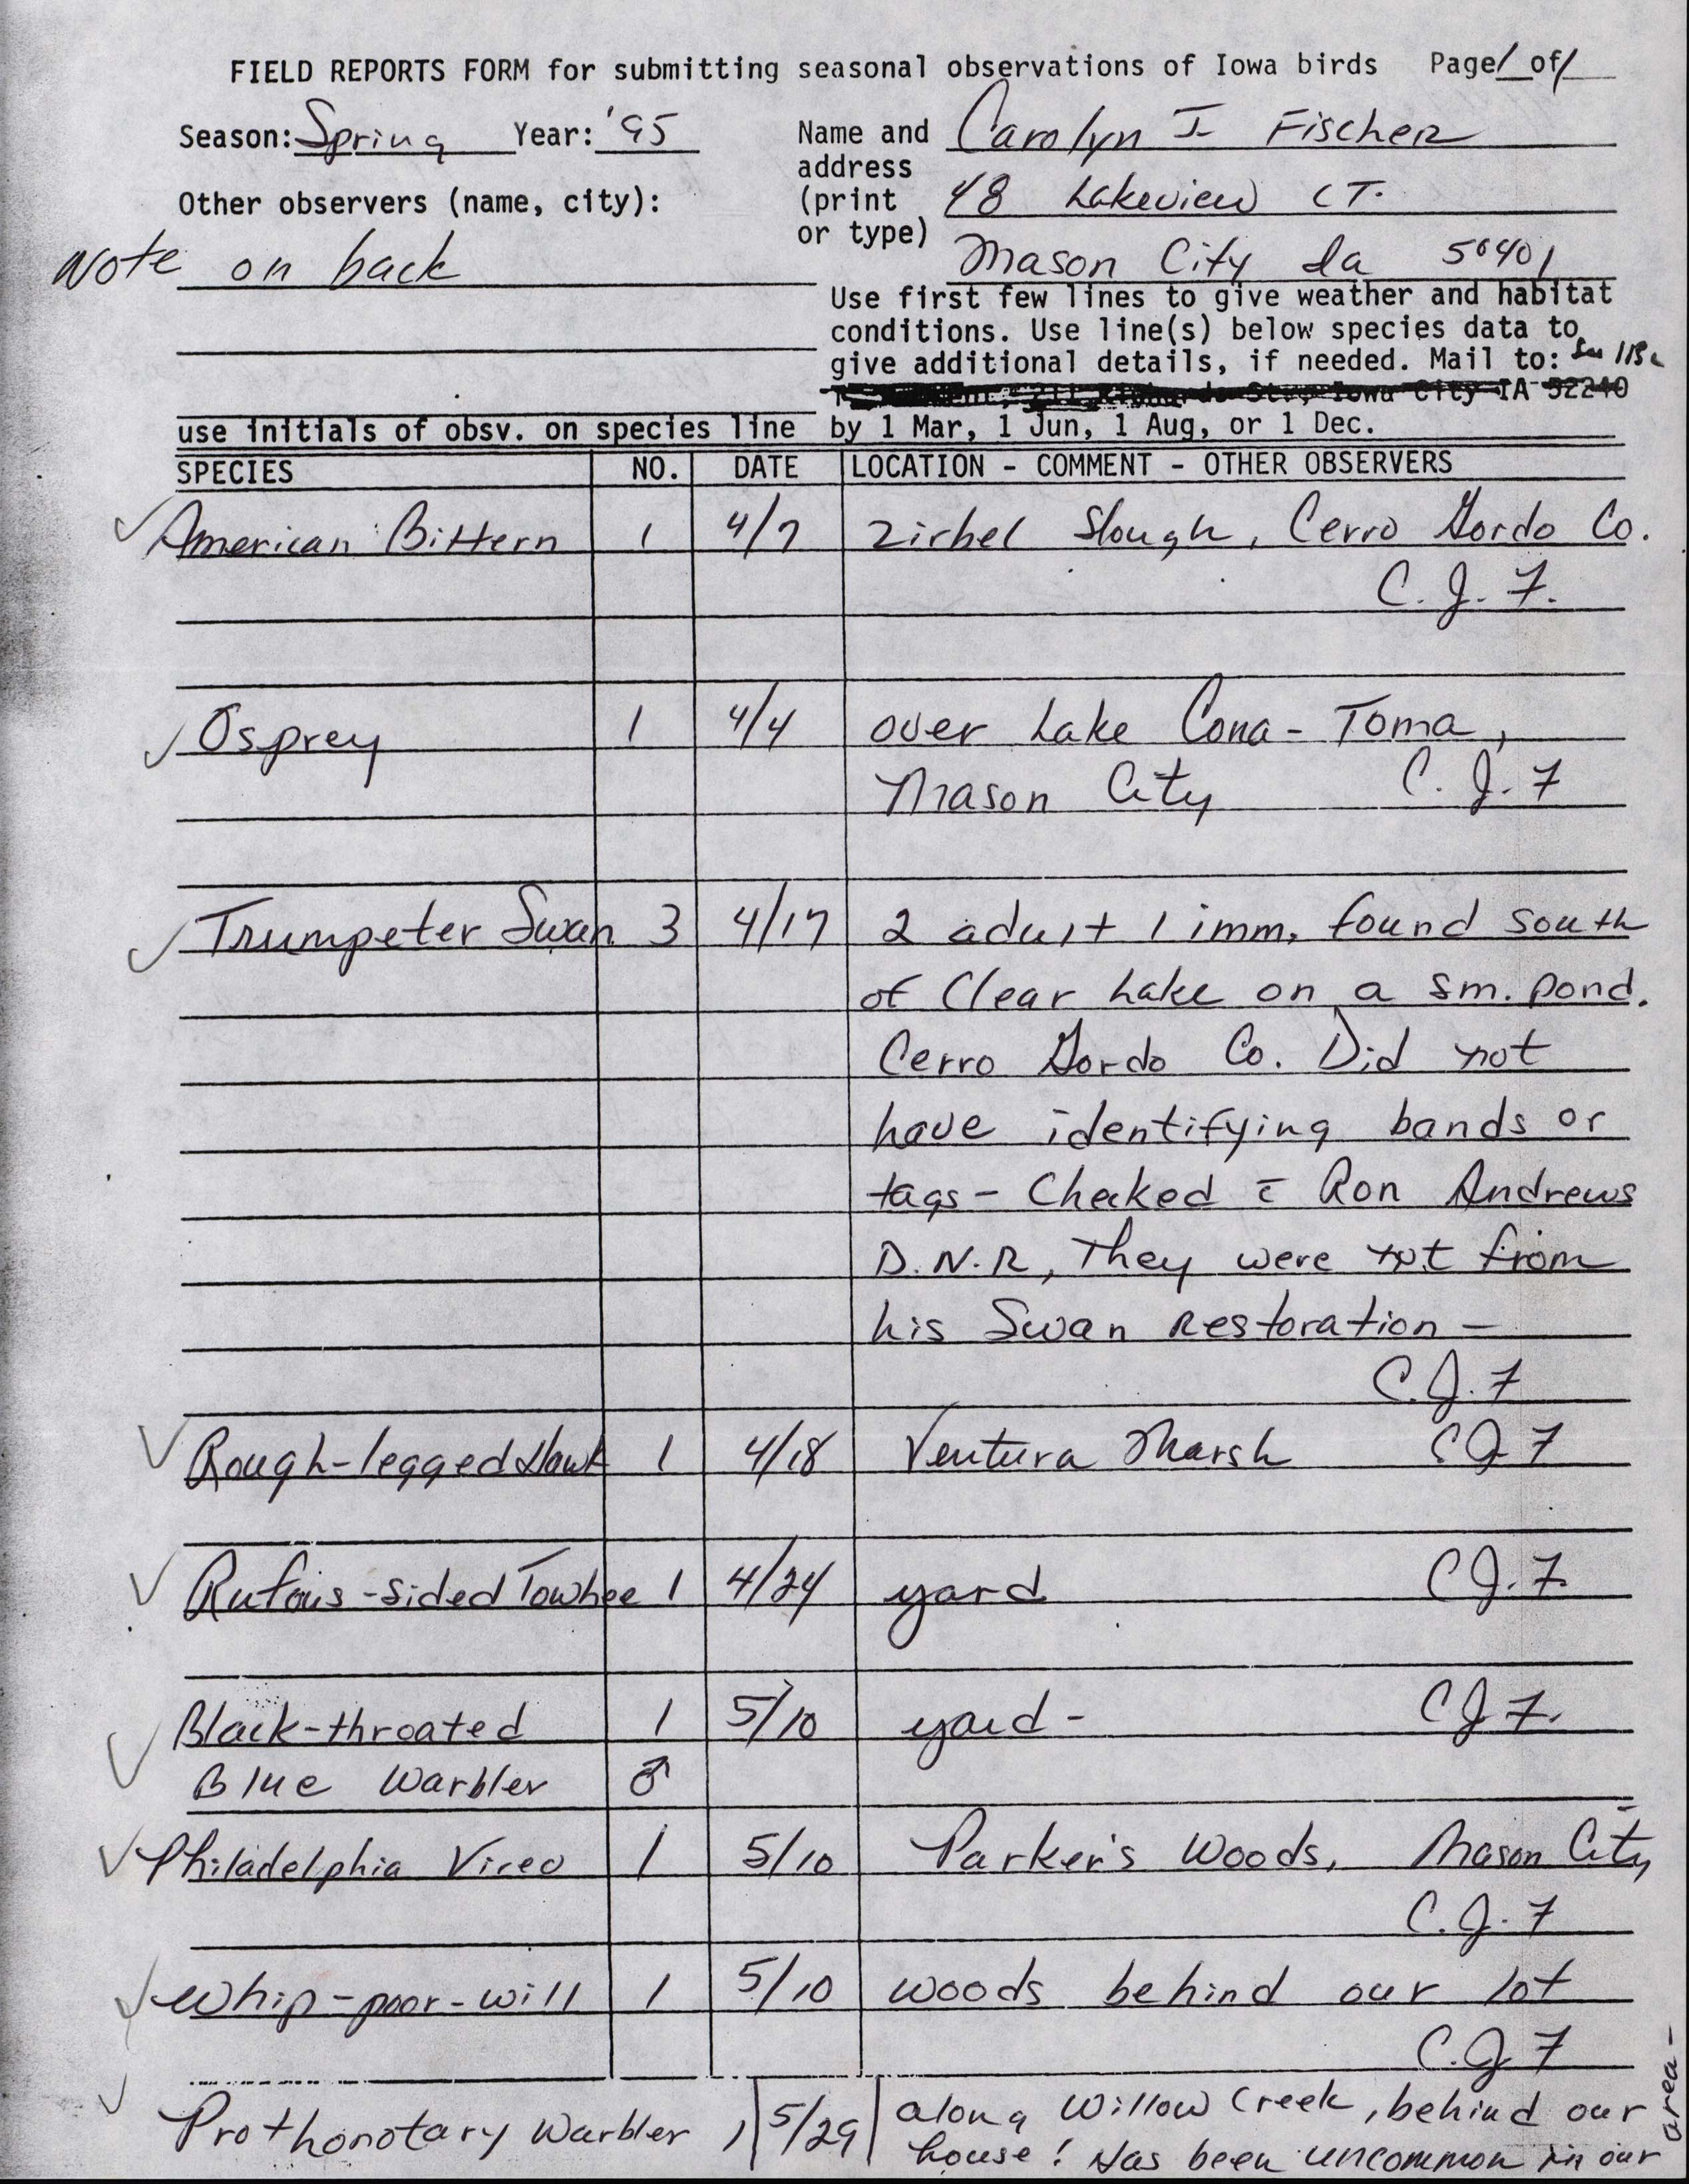 Field reports form for submitting seasonal observations of Iowa birds, spring 1995, Carolyn Fischer